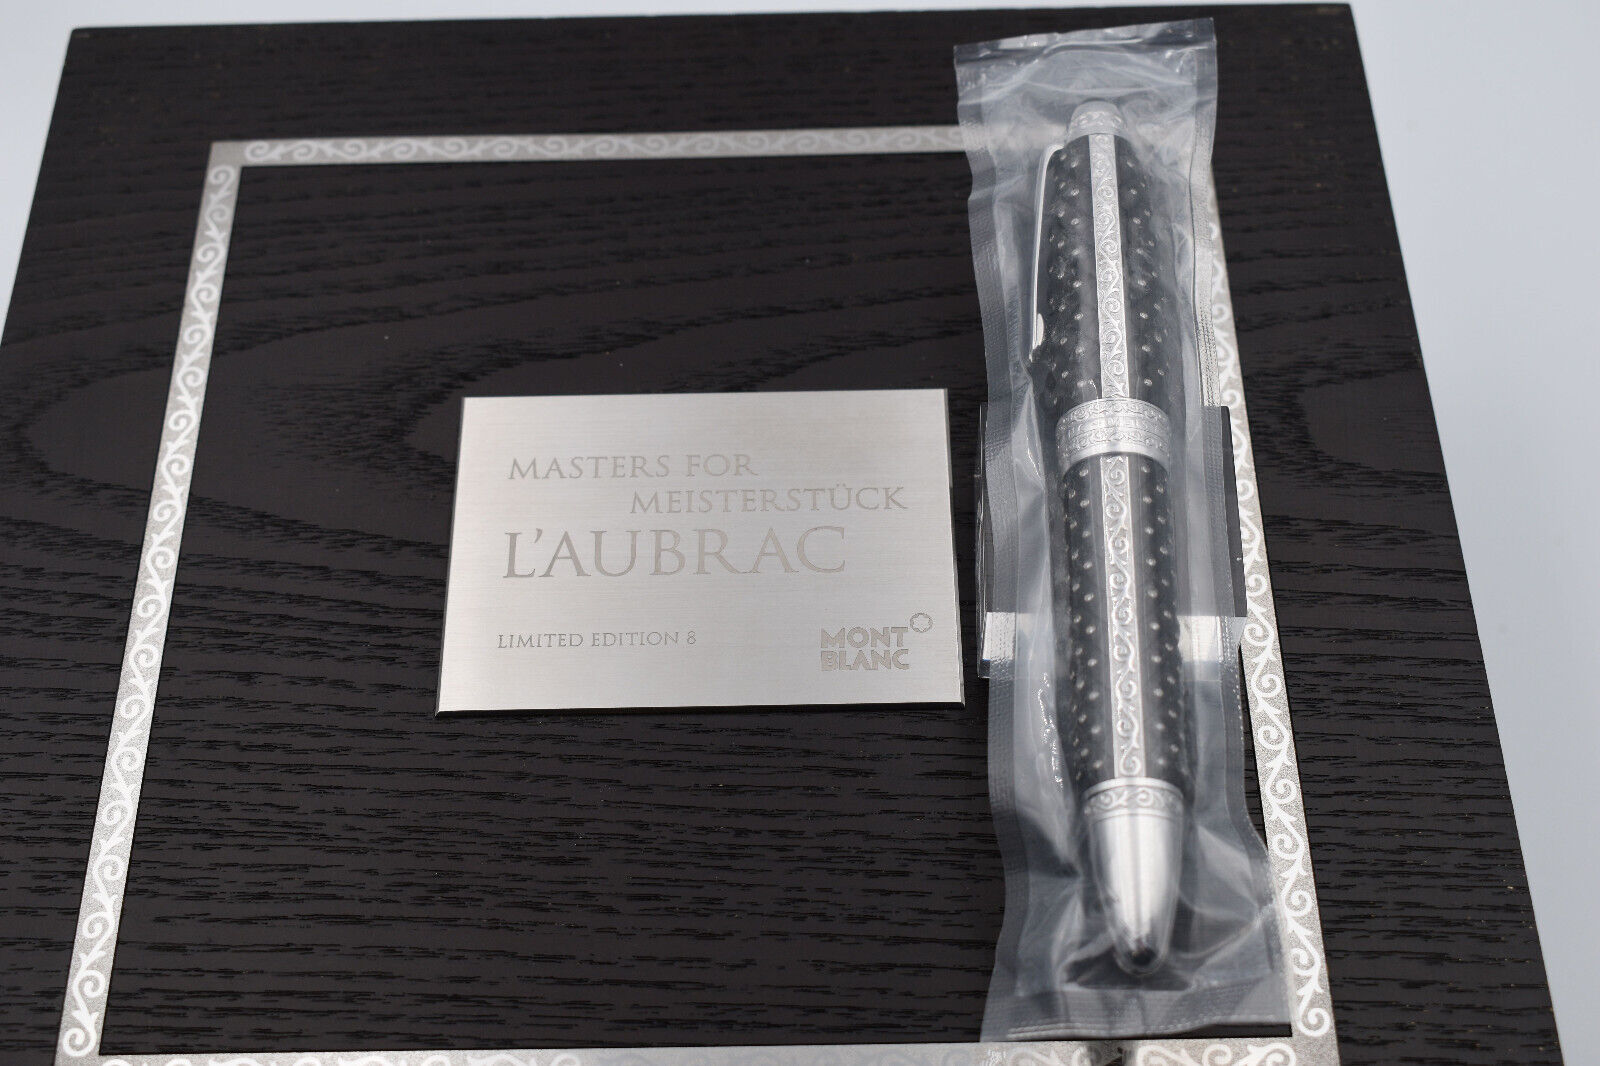 MONTBLANC 2012 L'AUBRAC Limited Edition 8  MASTER FOR MEISTERSTUCK Fountain Pen